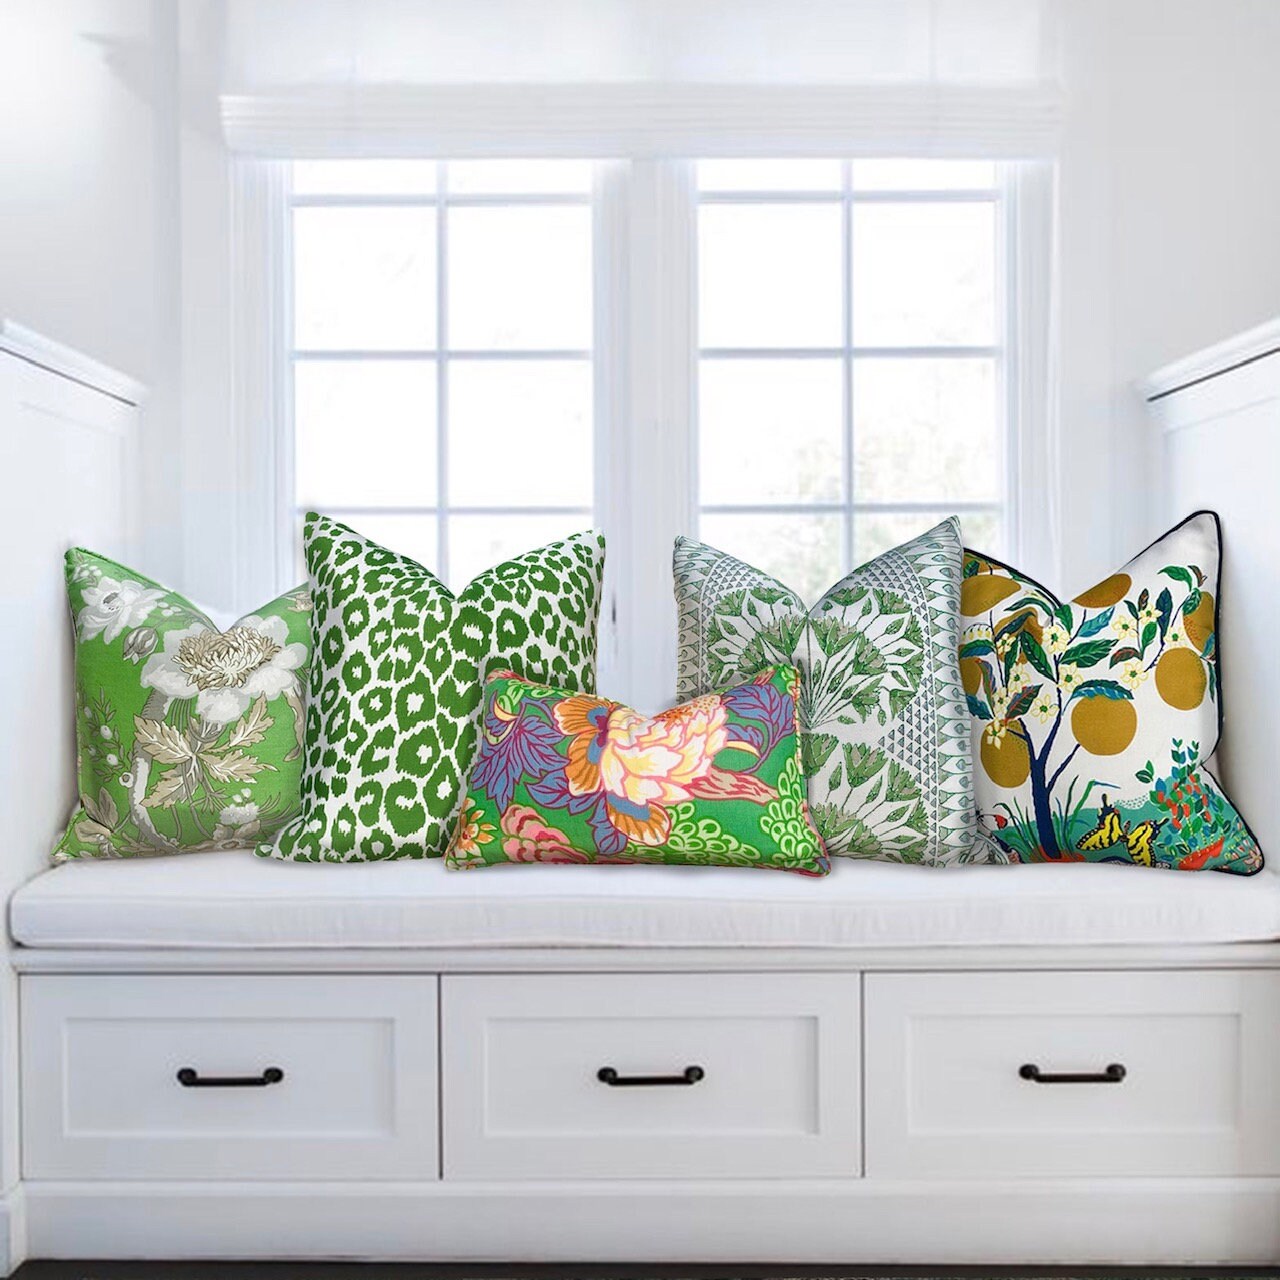 Outdoor Iconic Leopard Pillow in Green. Spotted lumbar Pillow Schumacher Accent Pillow Cover Square Toss Pillow, Accent Pillow